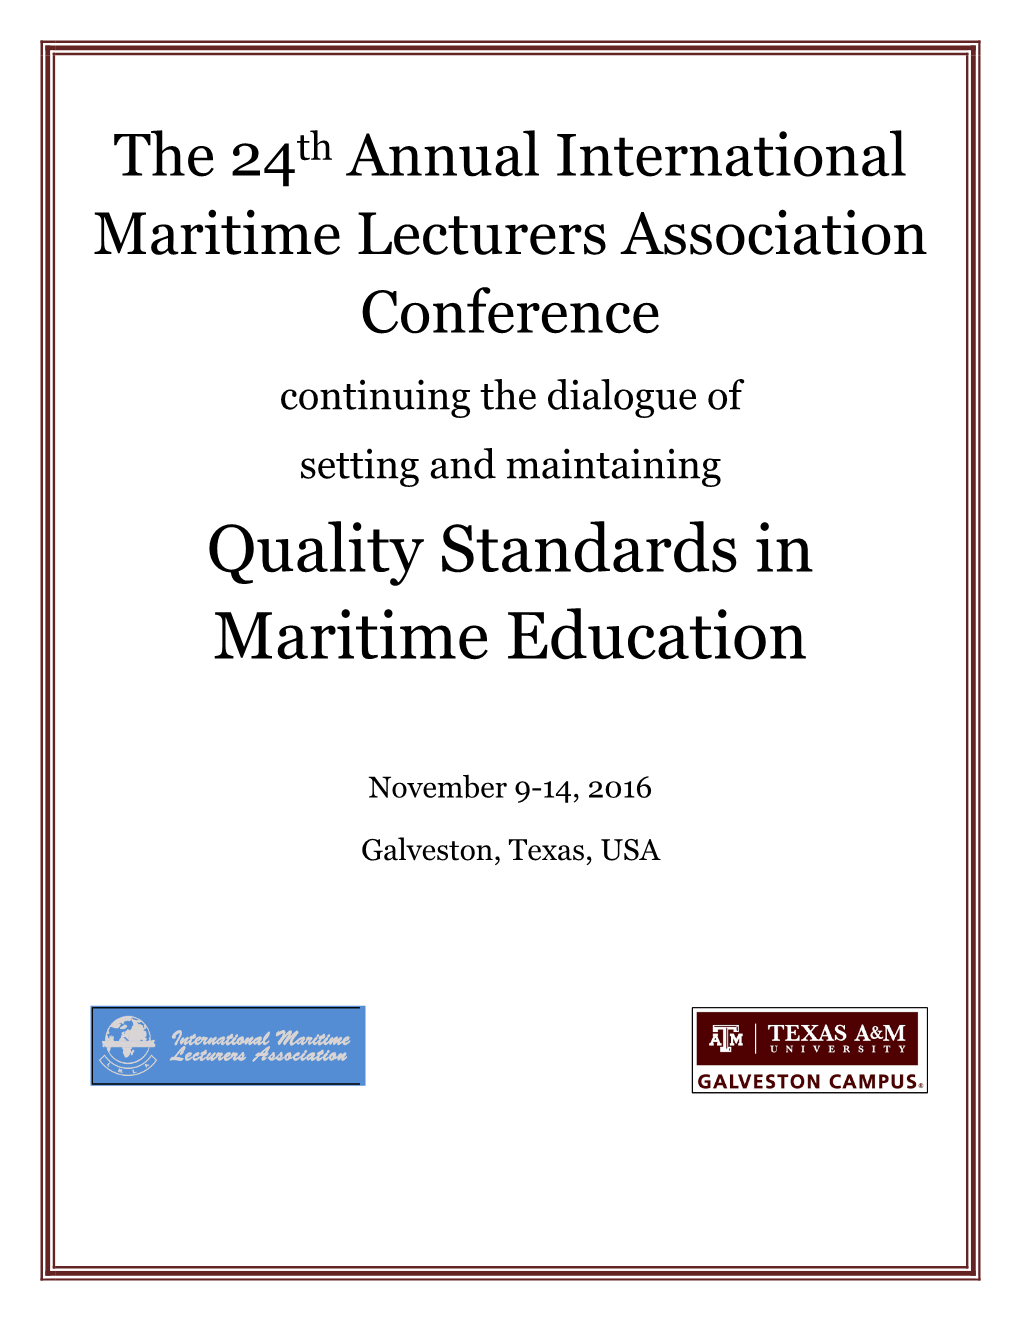 Quality Standards in Maritime Education